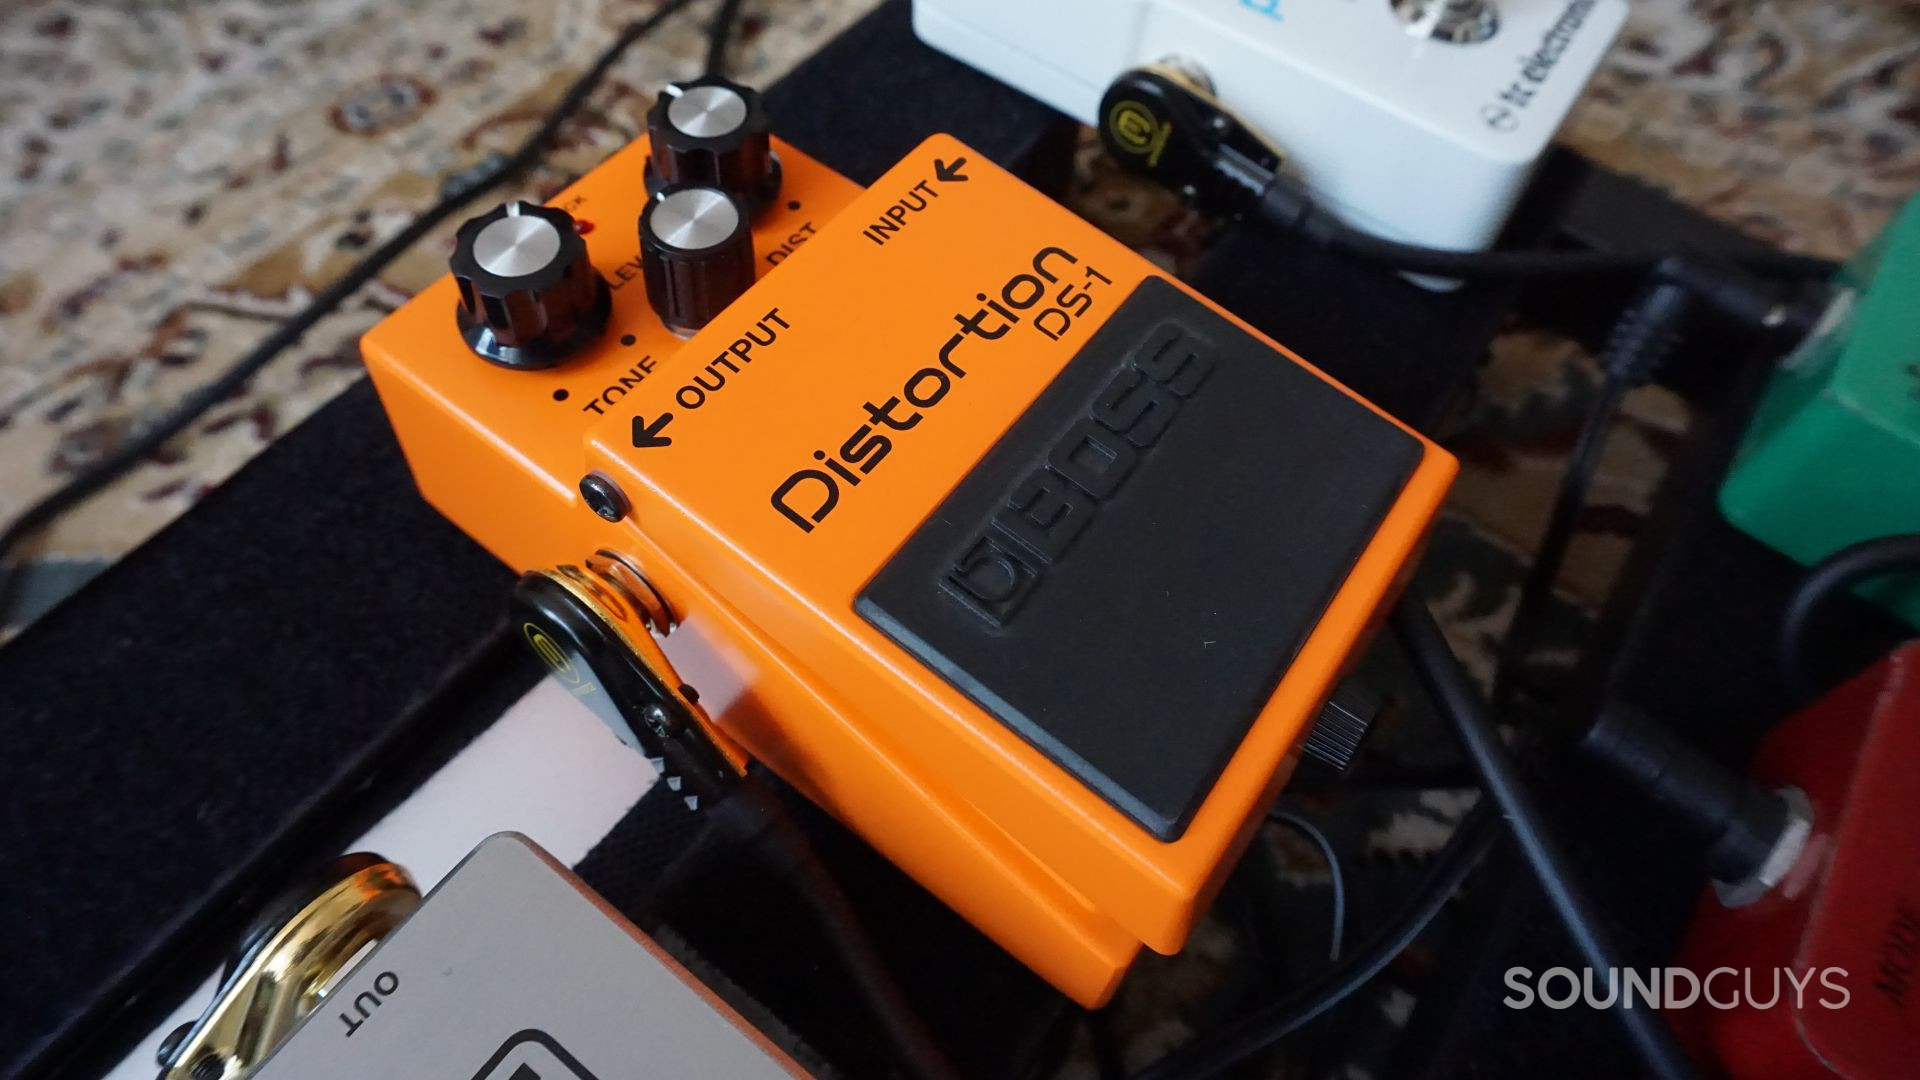 The BOSS DS-1 features a single bypass button for turning the distortion effect on and off